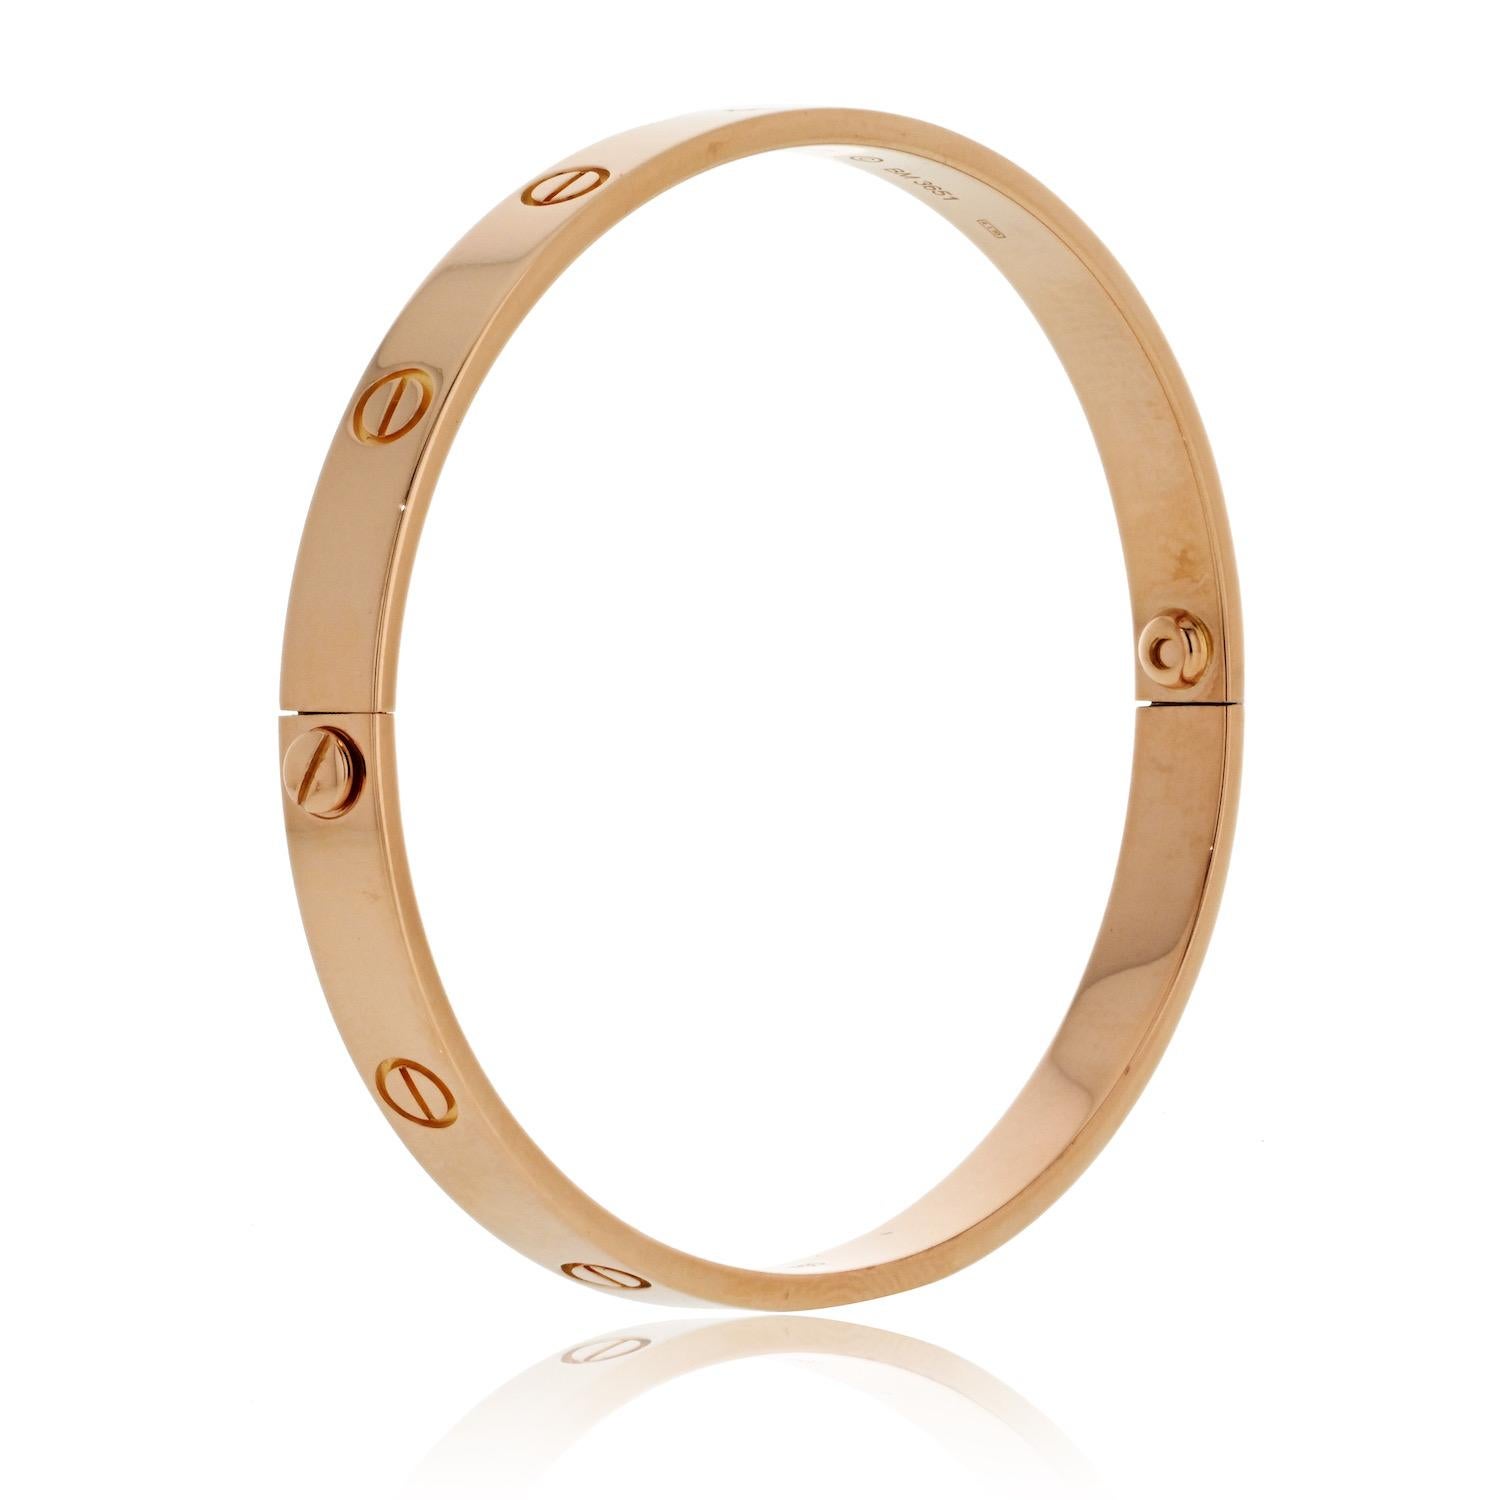 Cartier Love Bracelet Size 20 in 18K Rose Gold In Excellent Condition For Sale In New York, NY